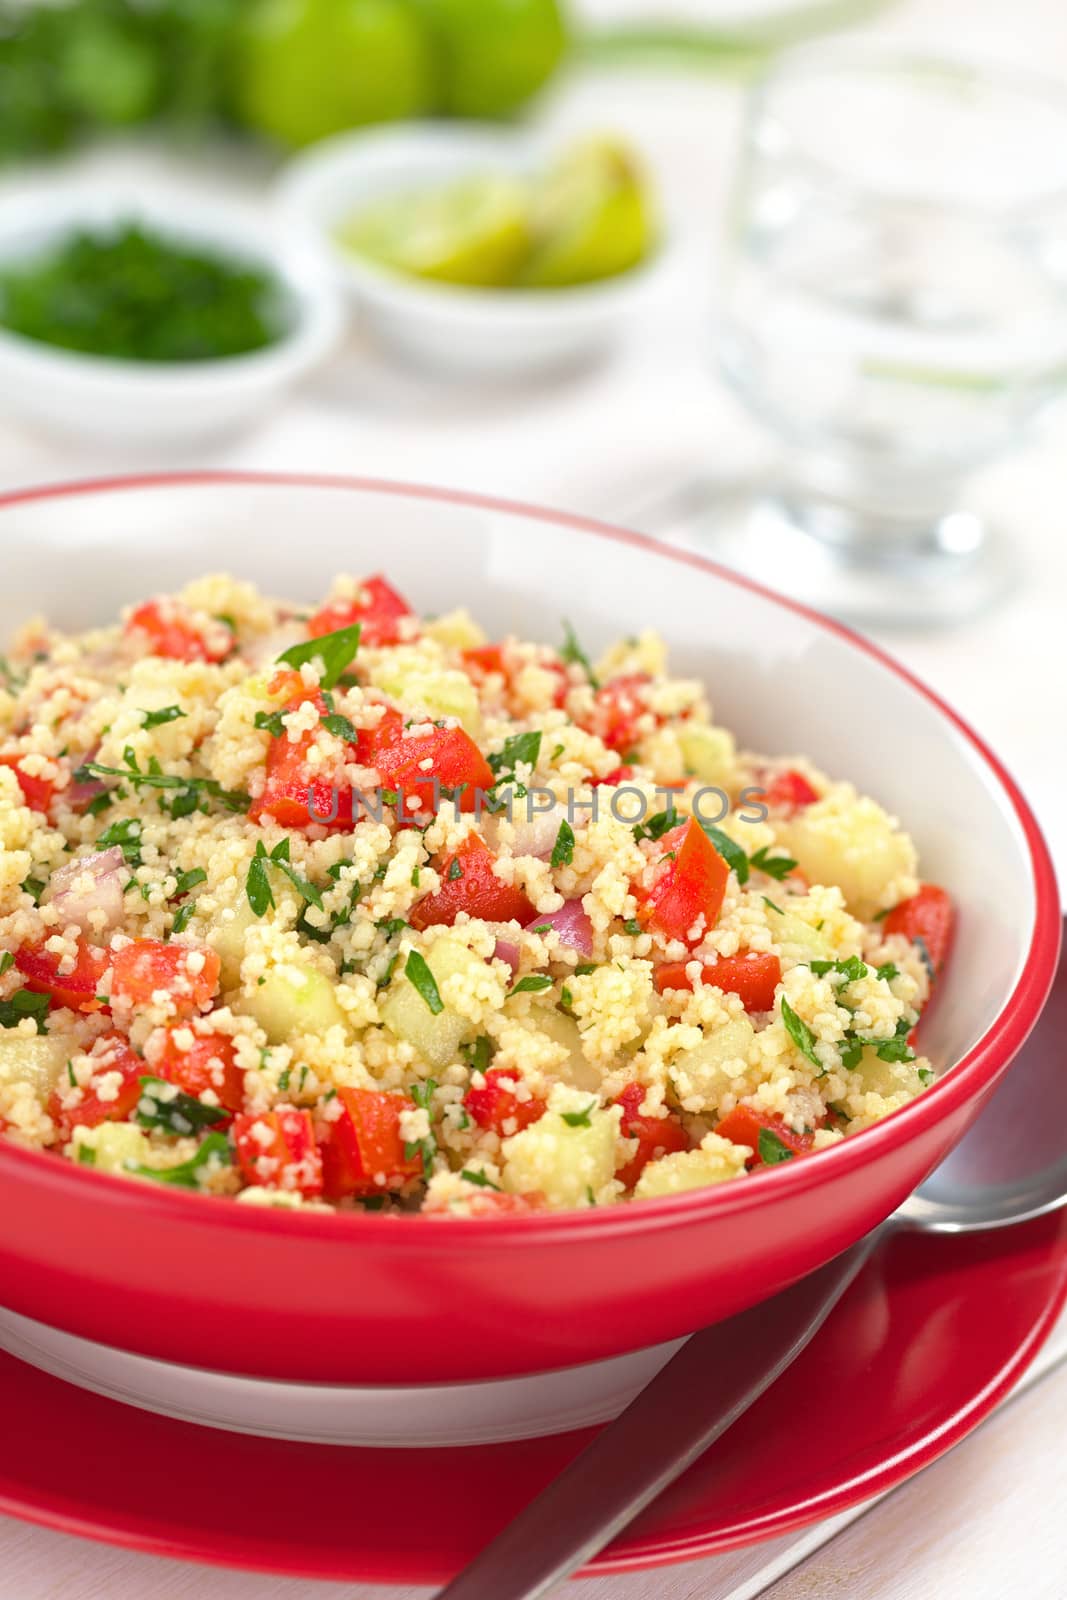 Fresh Homemade Tabbouleh, an Arabian Salad with Couscous by ildi